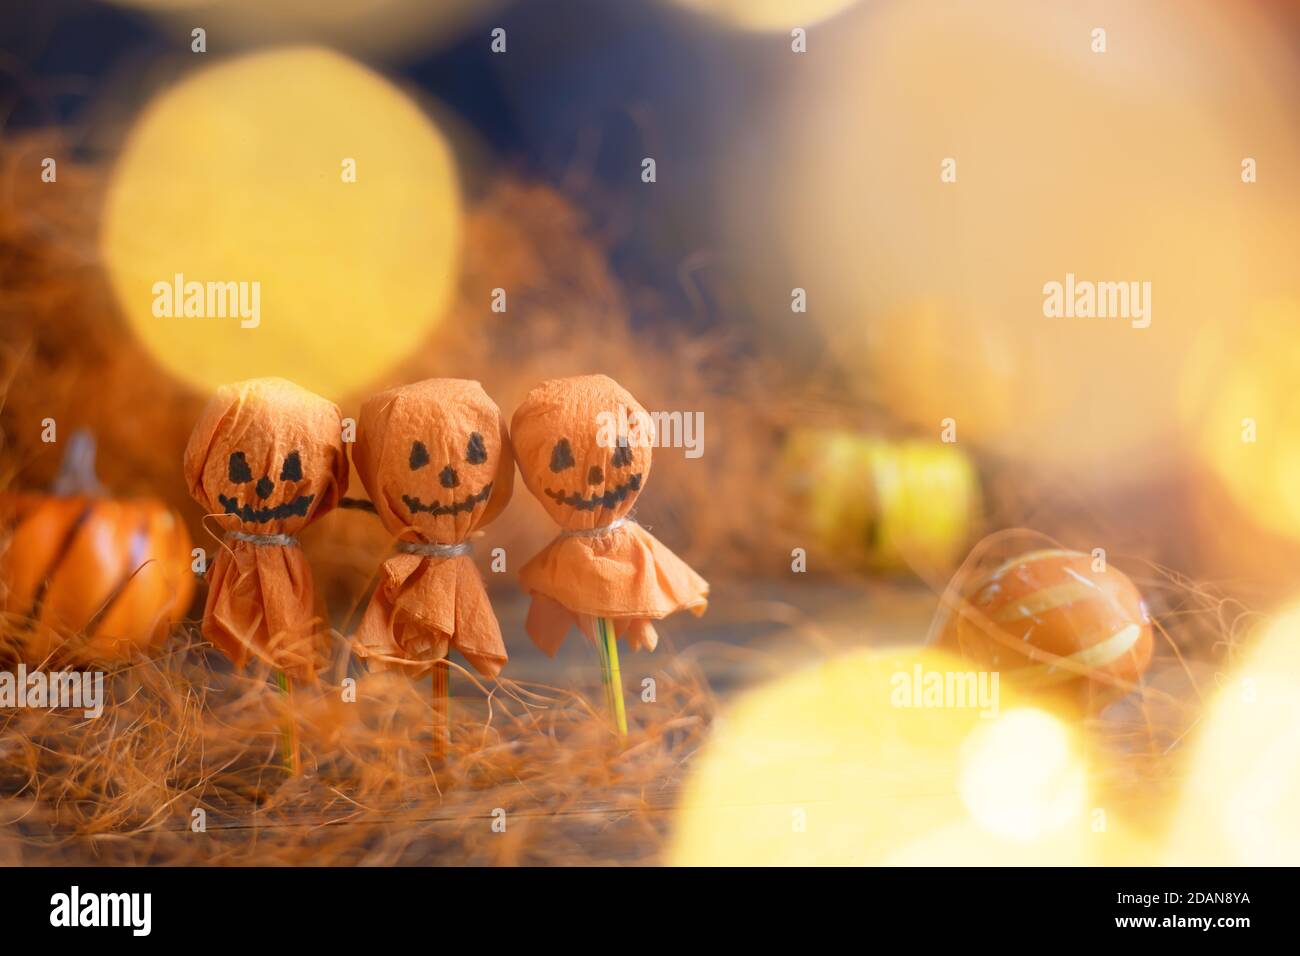 Three cheerful round lollipops converted into a pumpkin Stock Photo